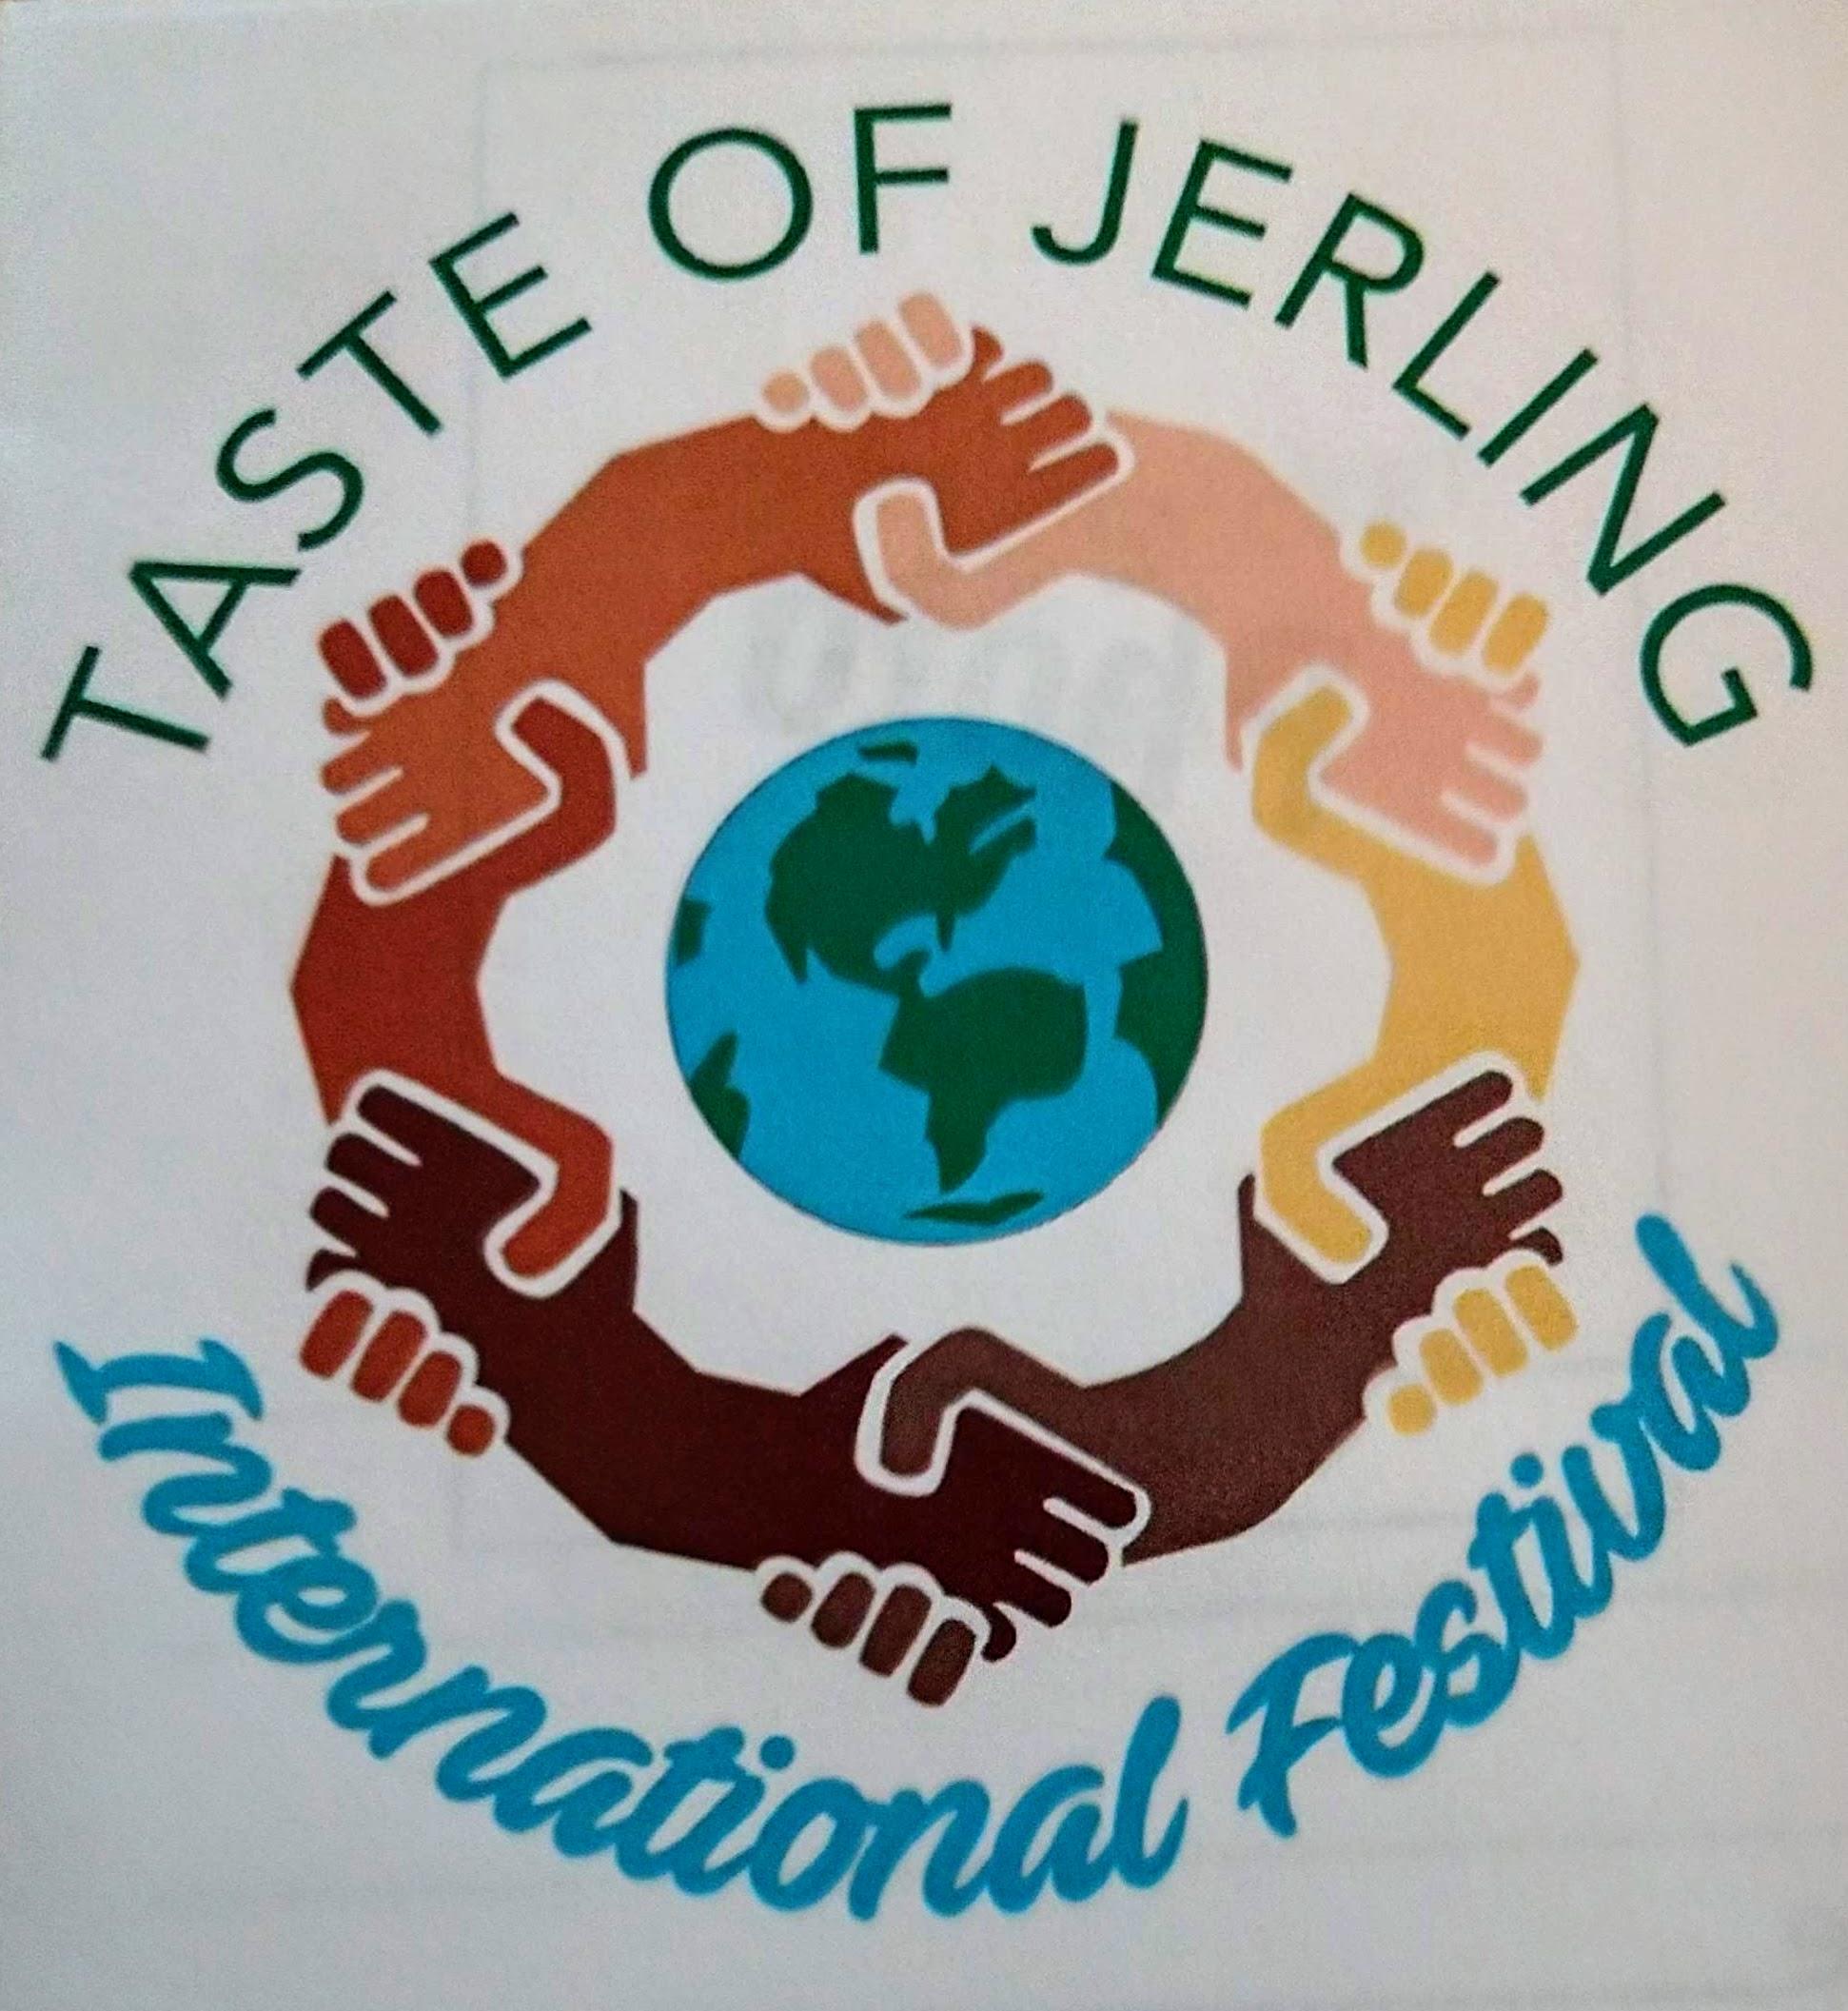 The Jerling PFE Presents The10th Annual International Taste of Jerling Fest